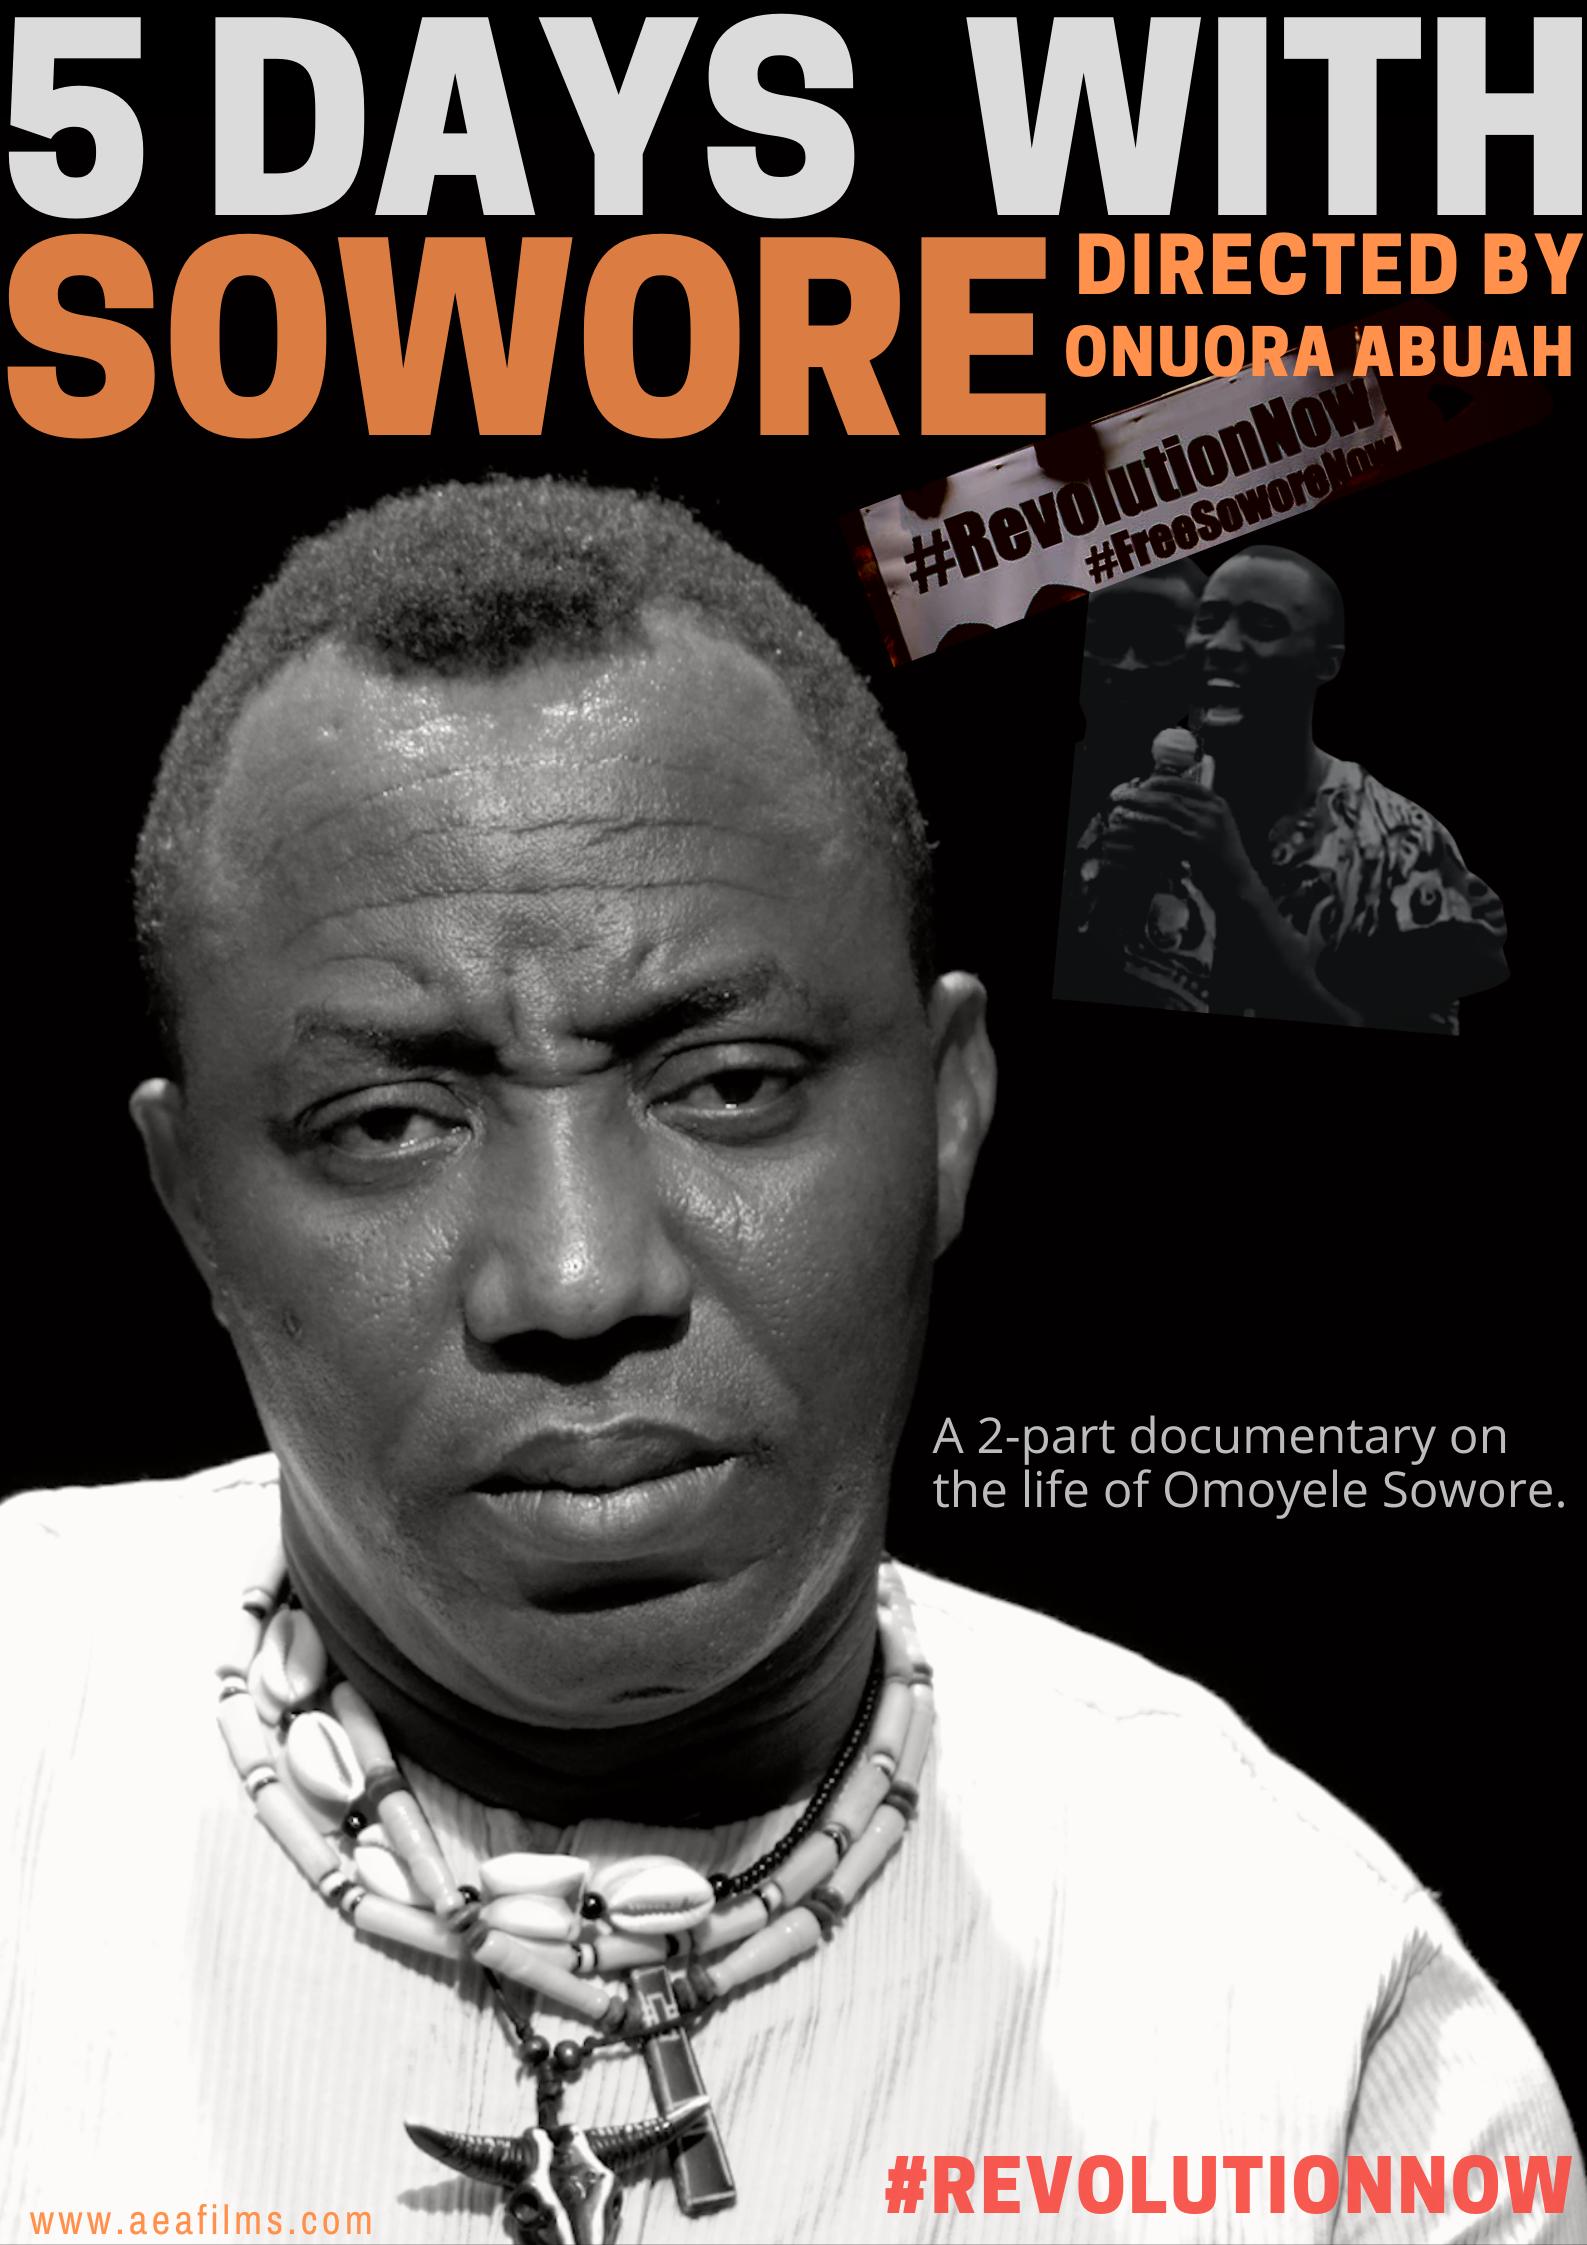 Revolution Now: 5 Days with Sowore